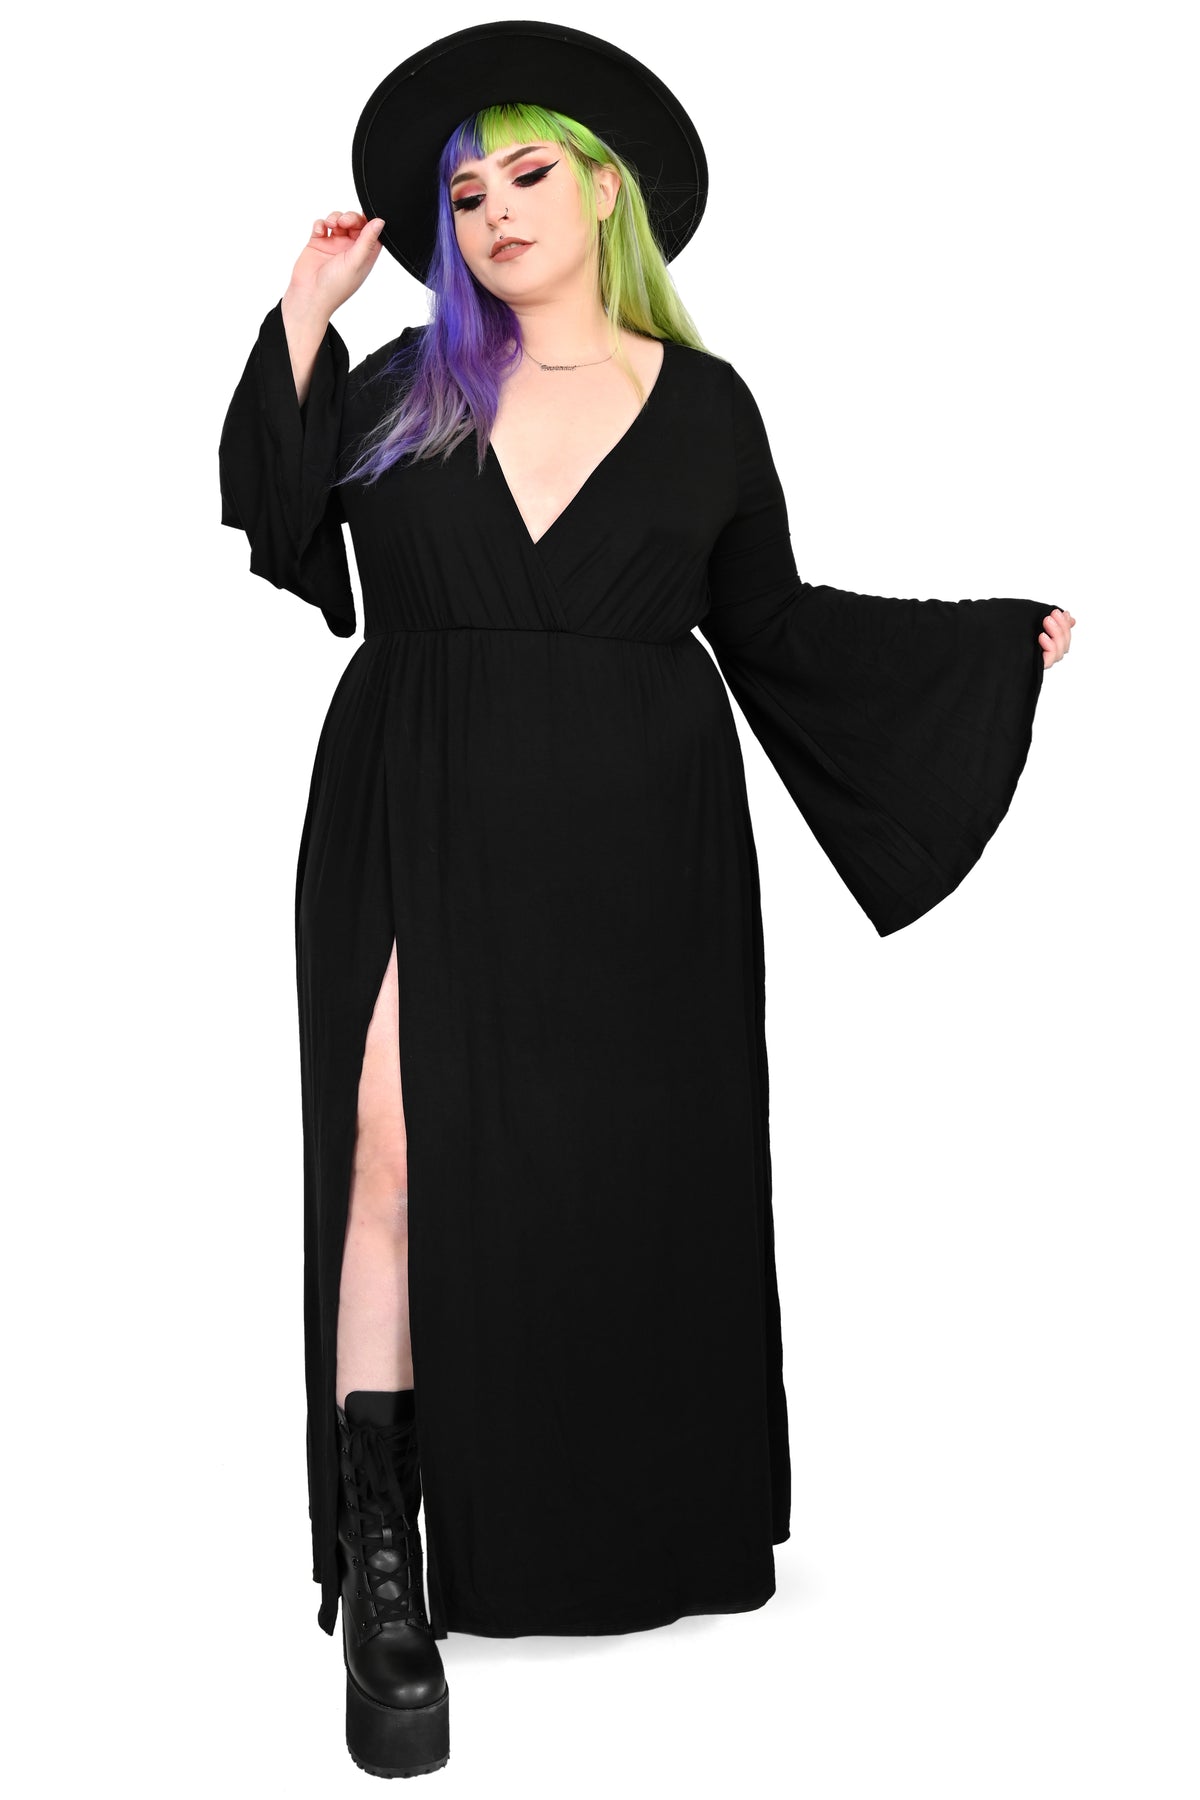 Dramatic bell sleeve wrap top with deep cut V-neck line. Long skirt bottom with one sky high sexy side slit. It has a built in full backside bodysuit bottom with snap crotch to keep the dress in place.